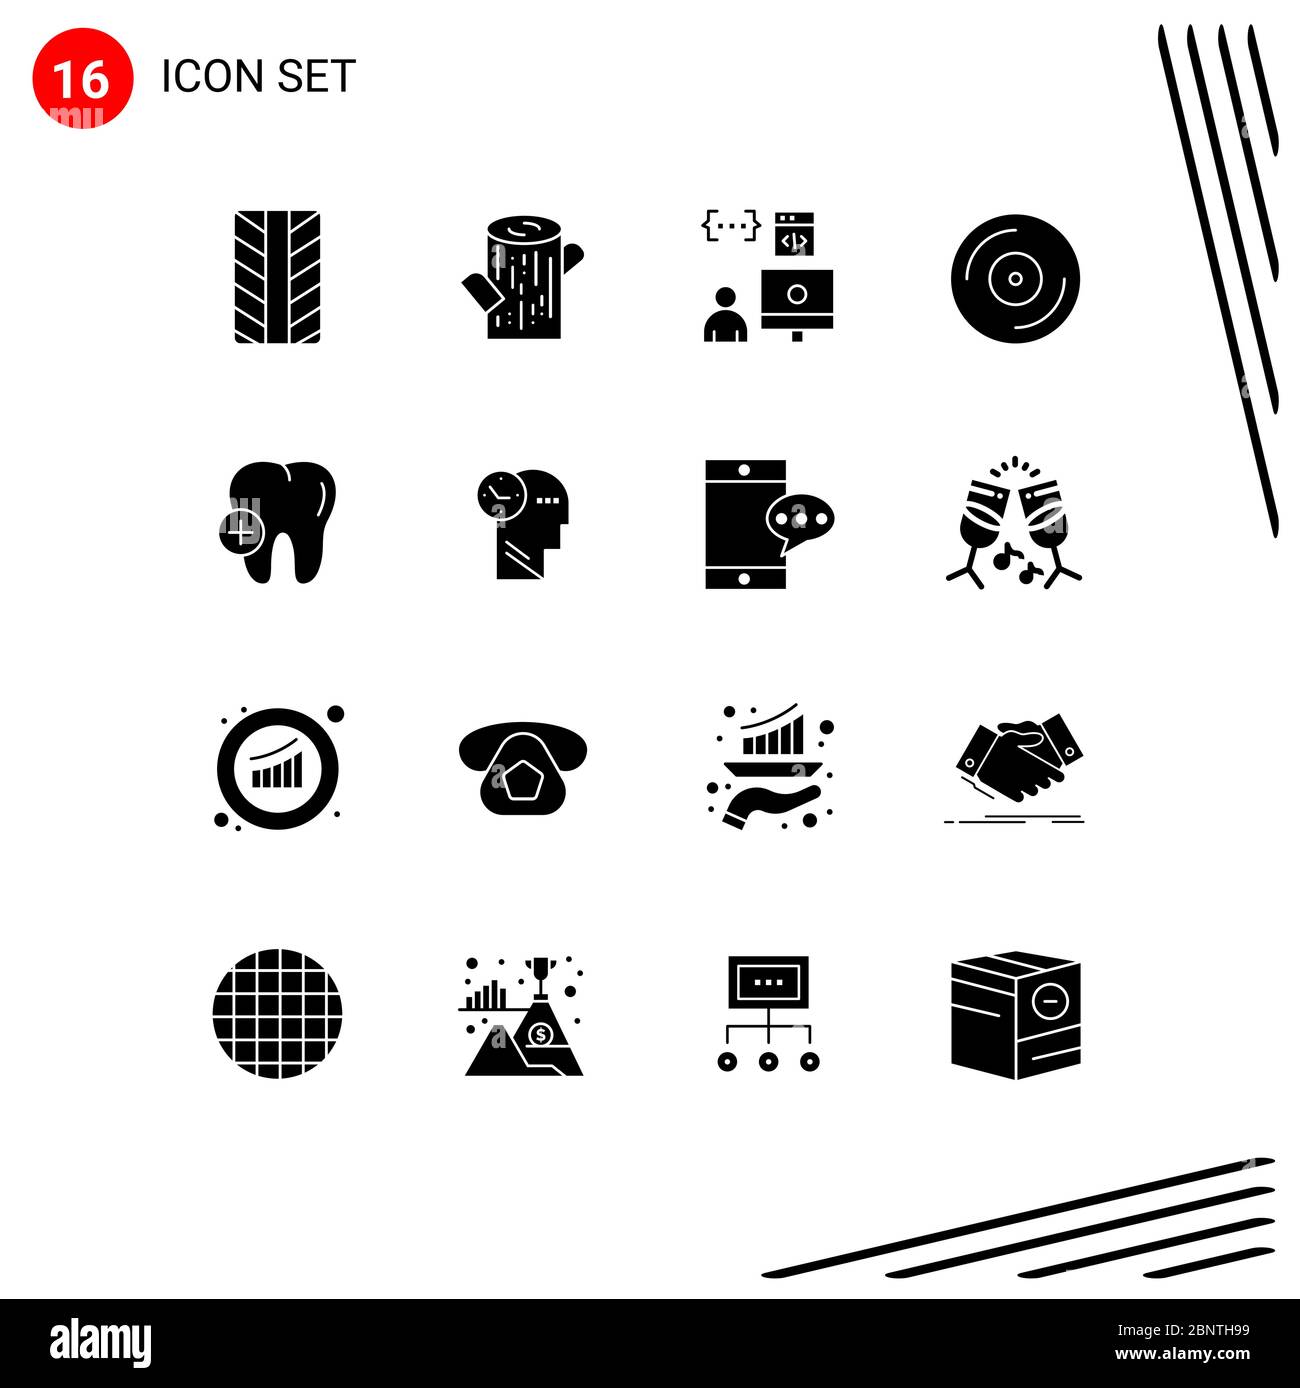 Set of 16 Modern UI Icons Symbols Signs for mind, tooth, development ...